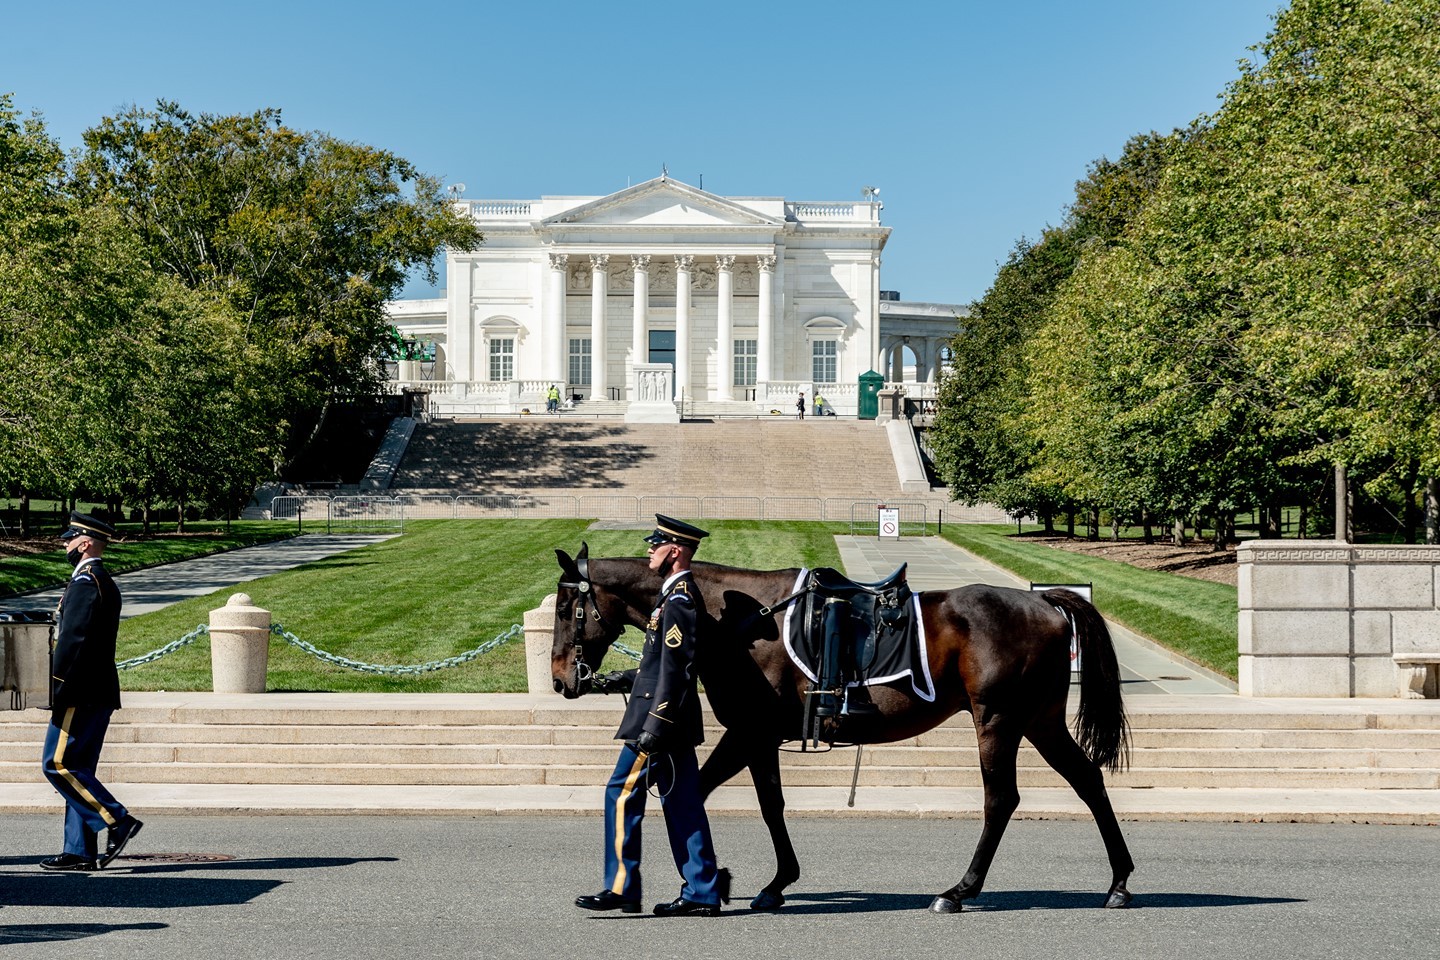 The caparisoned horse is walked in front of the Tomb of the Unknown Soldier at Arlington National Cemetery in Arlington, Virginia. 

The Third Infantry Regiment United States Army, more commonly known as the Old Guard, is always responsible for the caisson. Caisson is a horse drawn wagon or cart. The two caissons used at the Cemetery are from the WWI time period circa 1918-1919. Originally the caisson was used to bring artillery onto the battlefield. Once the artillery was off-loaded, the caisson was loaded with bodies of fallen service members. The wagon is pulled by six horses, but there are only three riders. The Old Guard service members only ride the horses on the left side because the horses on right side were originally used to take supplies onto the battlefield.

Officers with a rank of colonel or above in the Army and the Marine Corps may have a caparisoned (riderless) horse, if available. The riderless horse follows behind the caisson and is guided by an Old Guard service member. The horse wears an empty saddle with the boots in the stirrups backwards to signify the last ride of the officer.